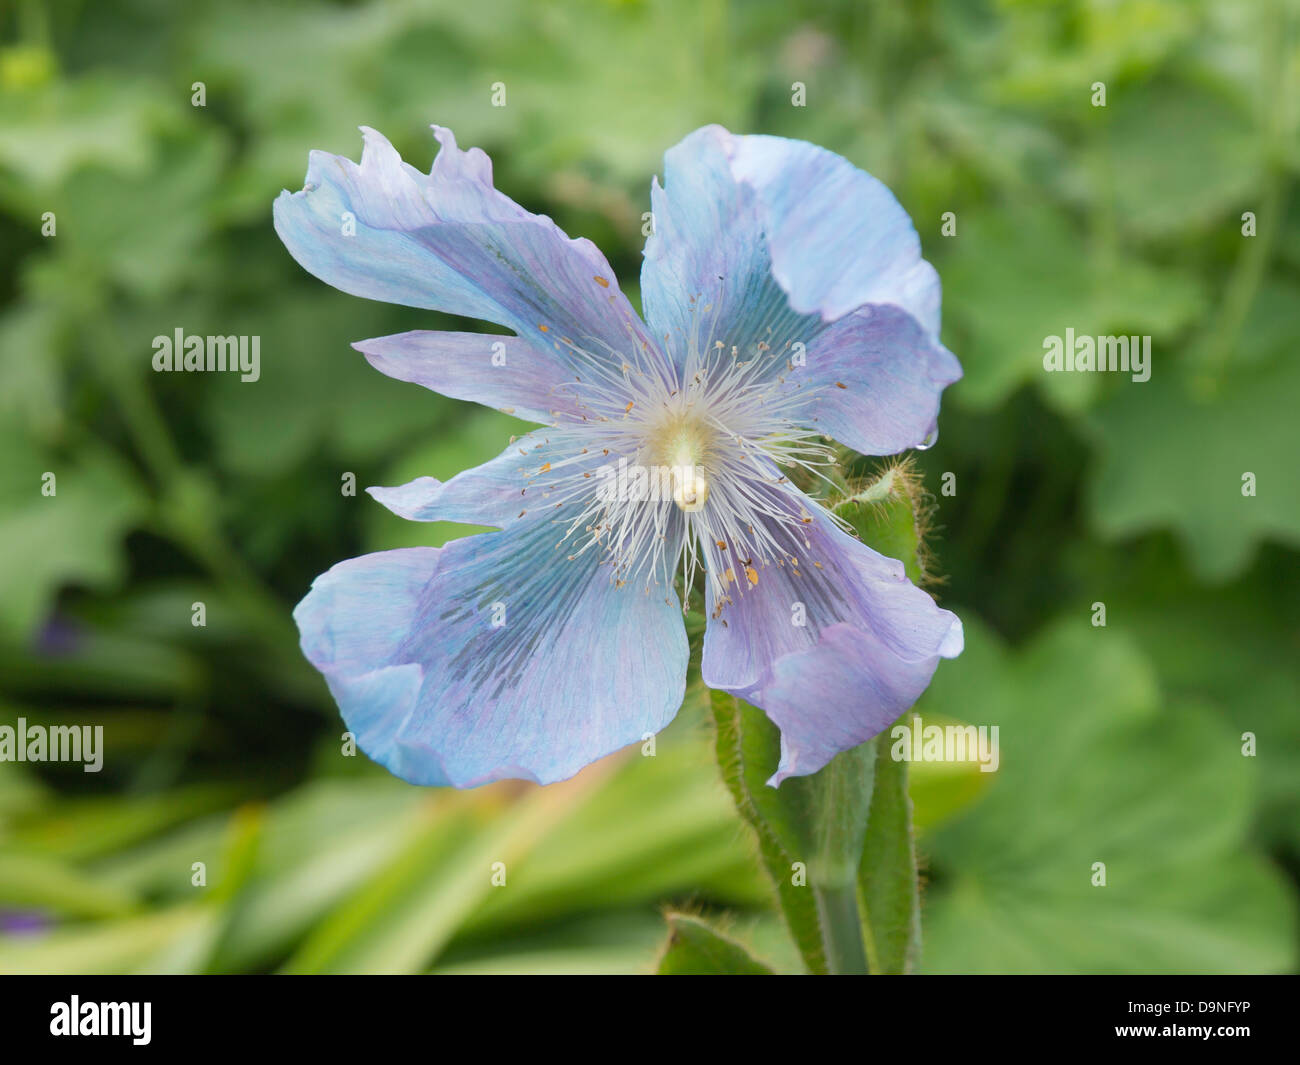 Meconopsis Blue Poppy garden flower also known as Himalayan Poppy Stock Photo